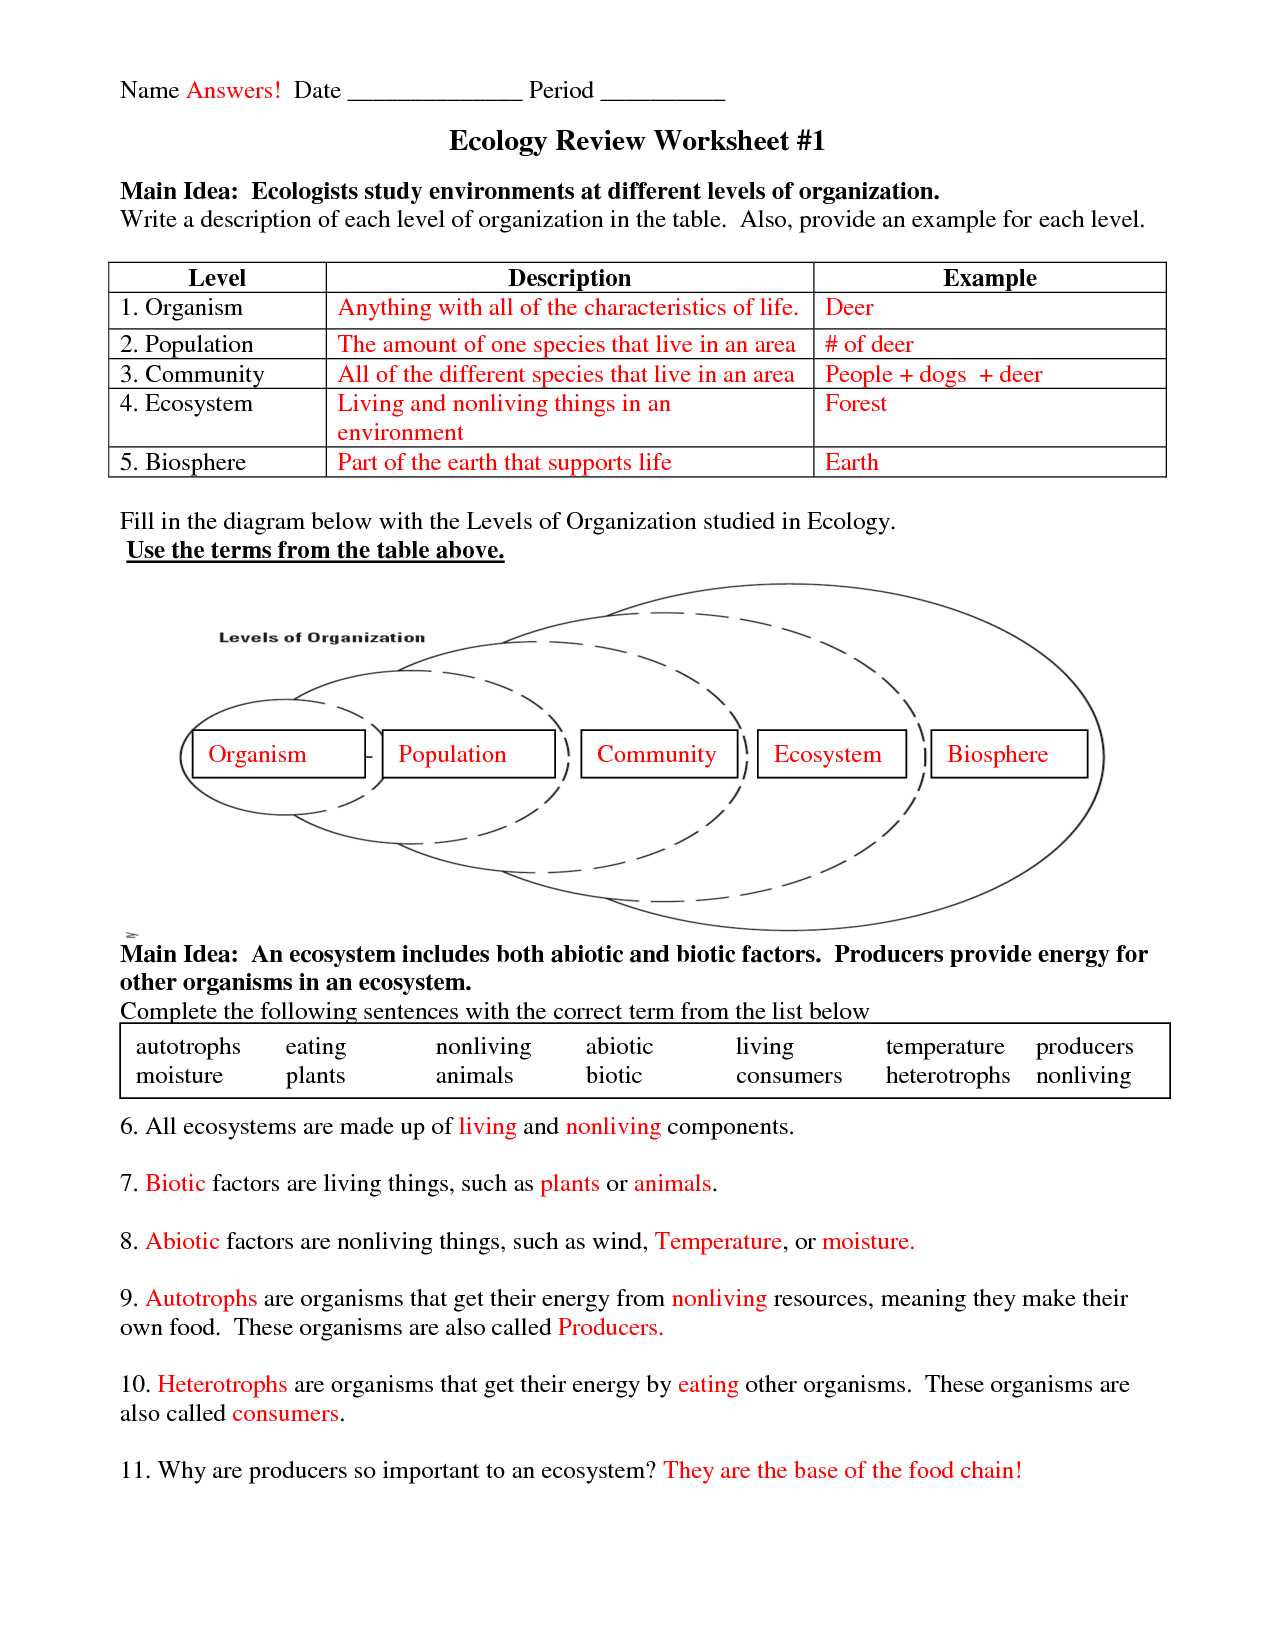 Photosynthesis and Cellular Respiration Worksheet Answers as Well as Impressive High School Biology Ecology Worksheets In Six Levels